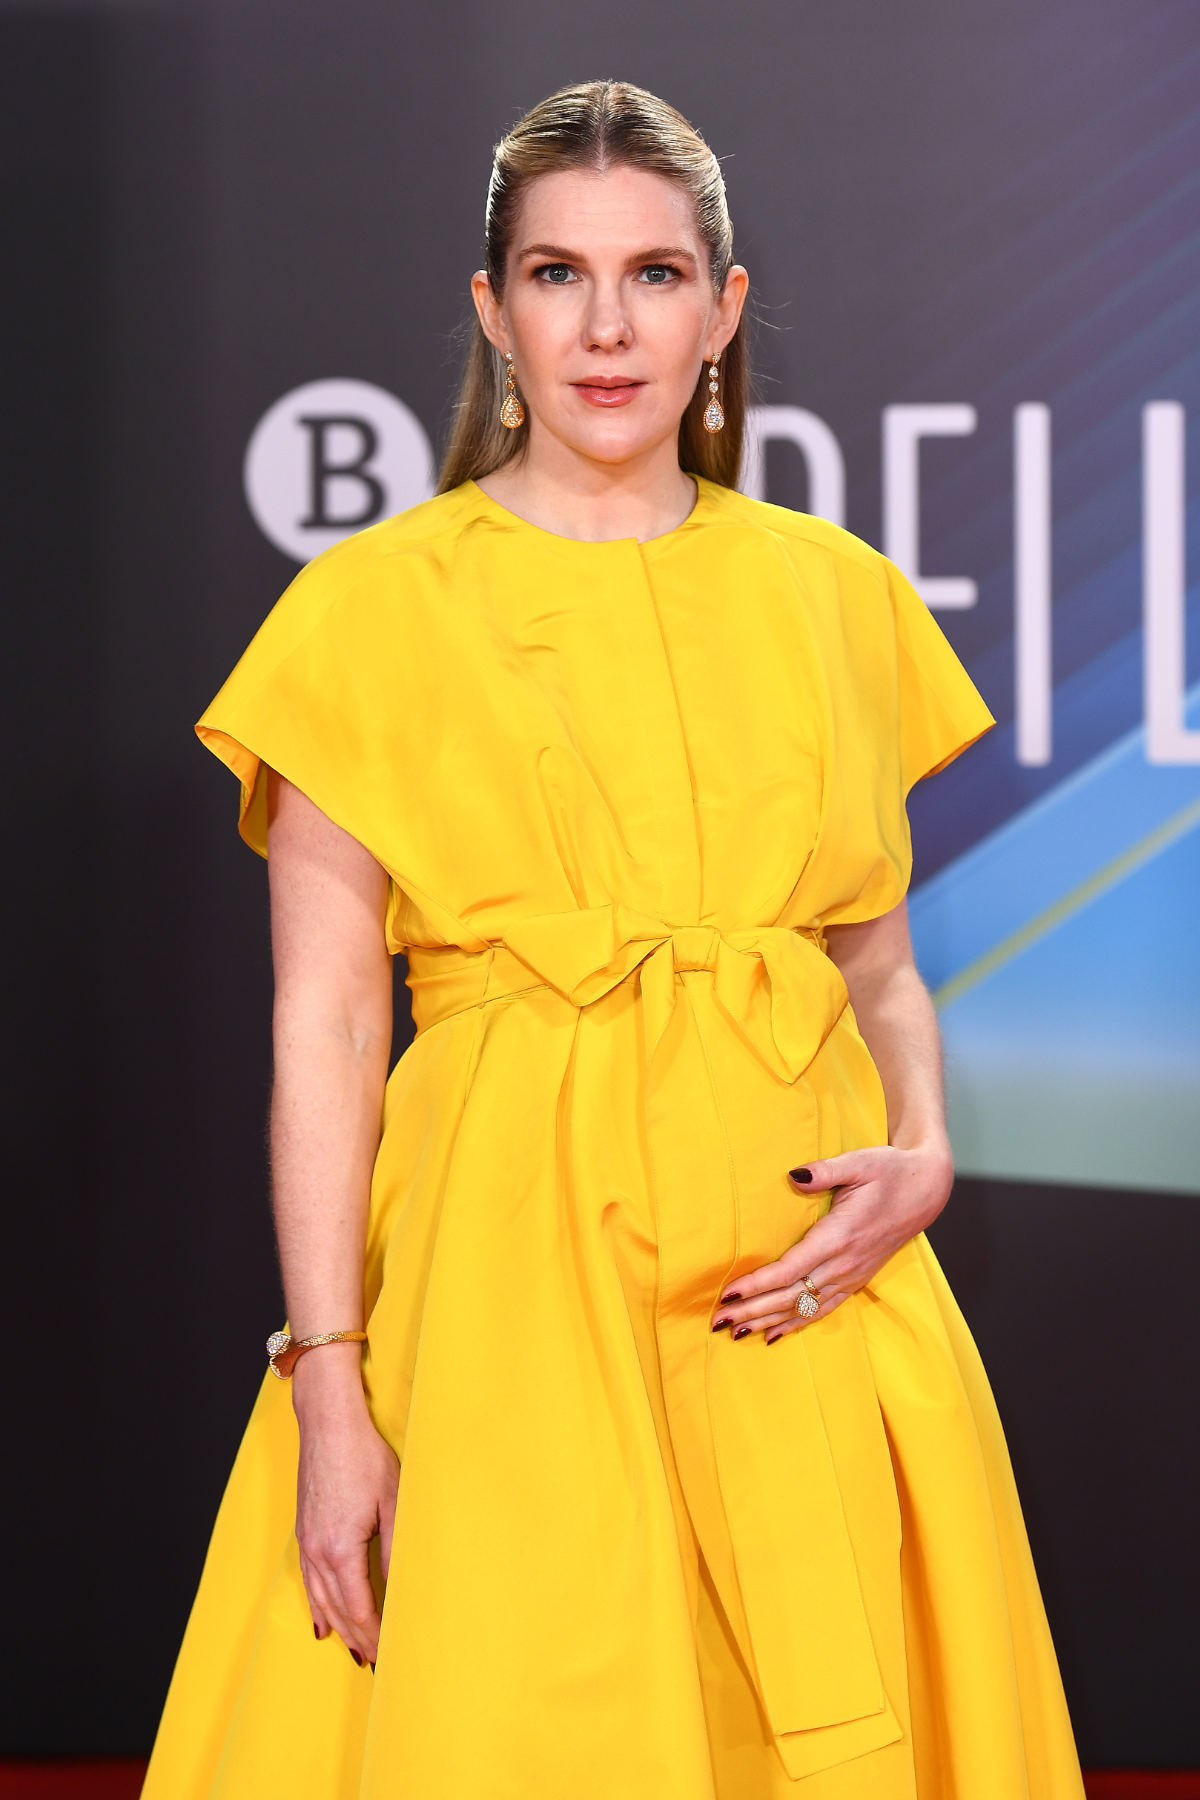 Lily Rabe In Boucheron Jewelry To The Premiere Of George Clooney's Film 